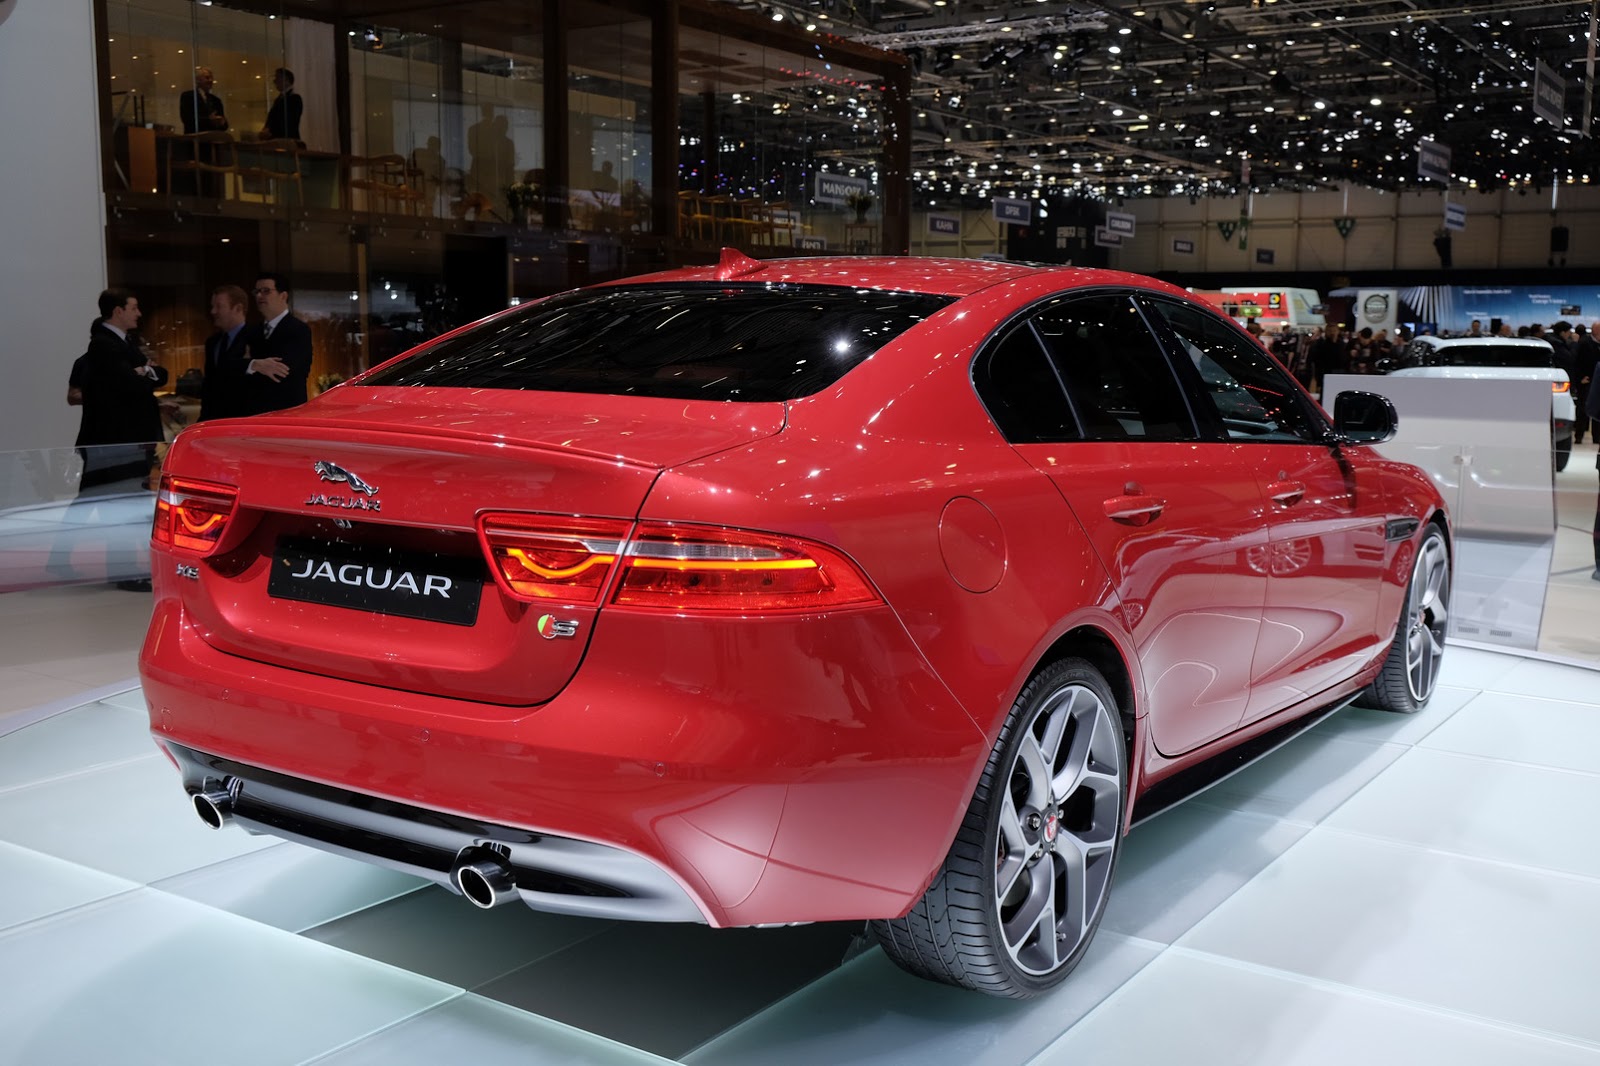 2017 Jaguar XE Priced From $34,900*, New 2016 XF From $51,900* | Carscoops